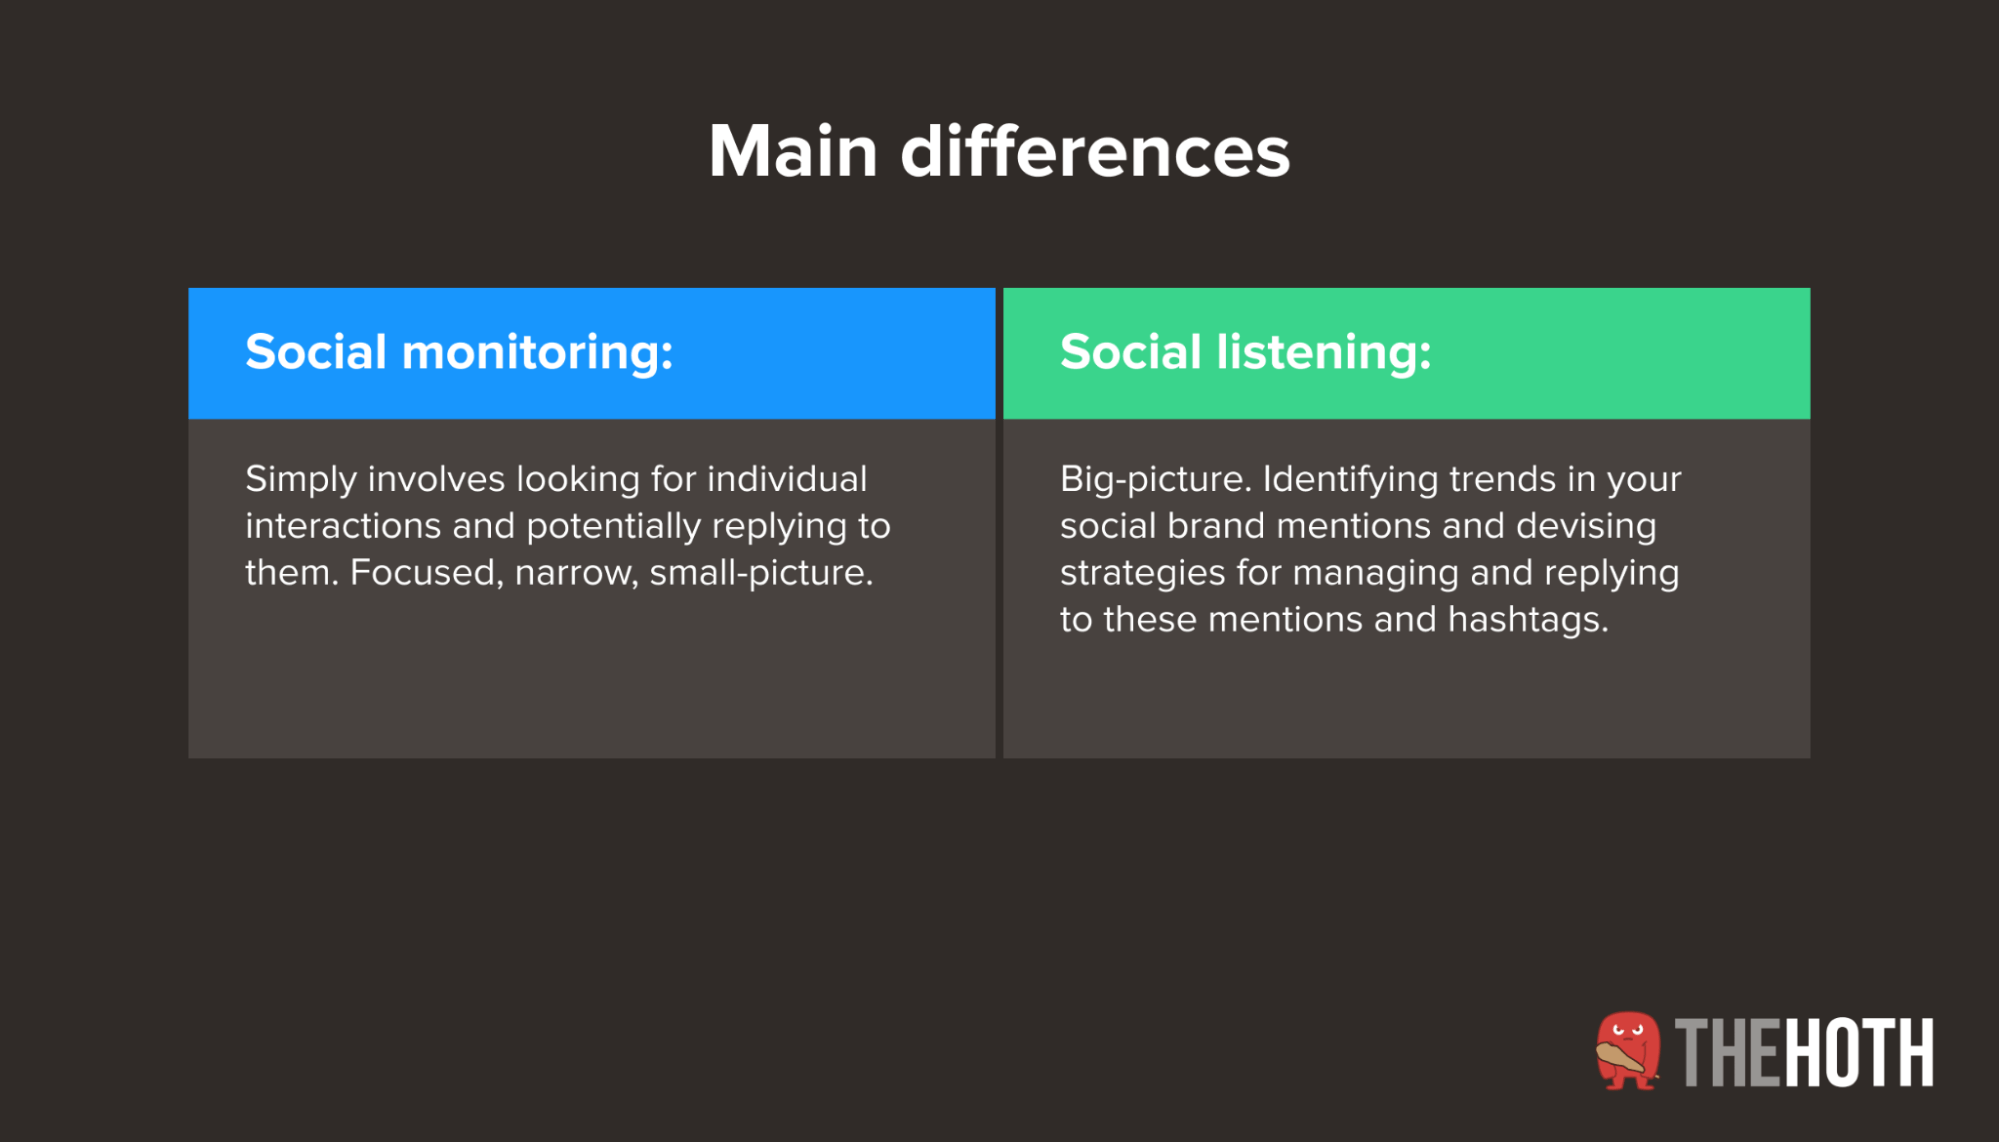 Differences between social listening and social monitoring